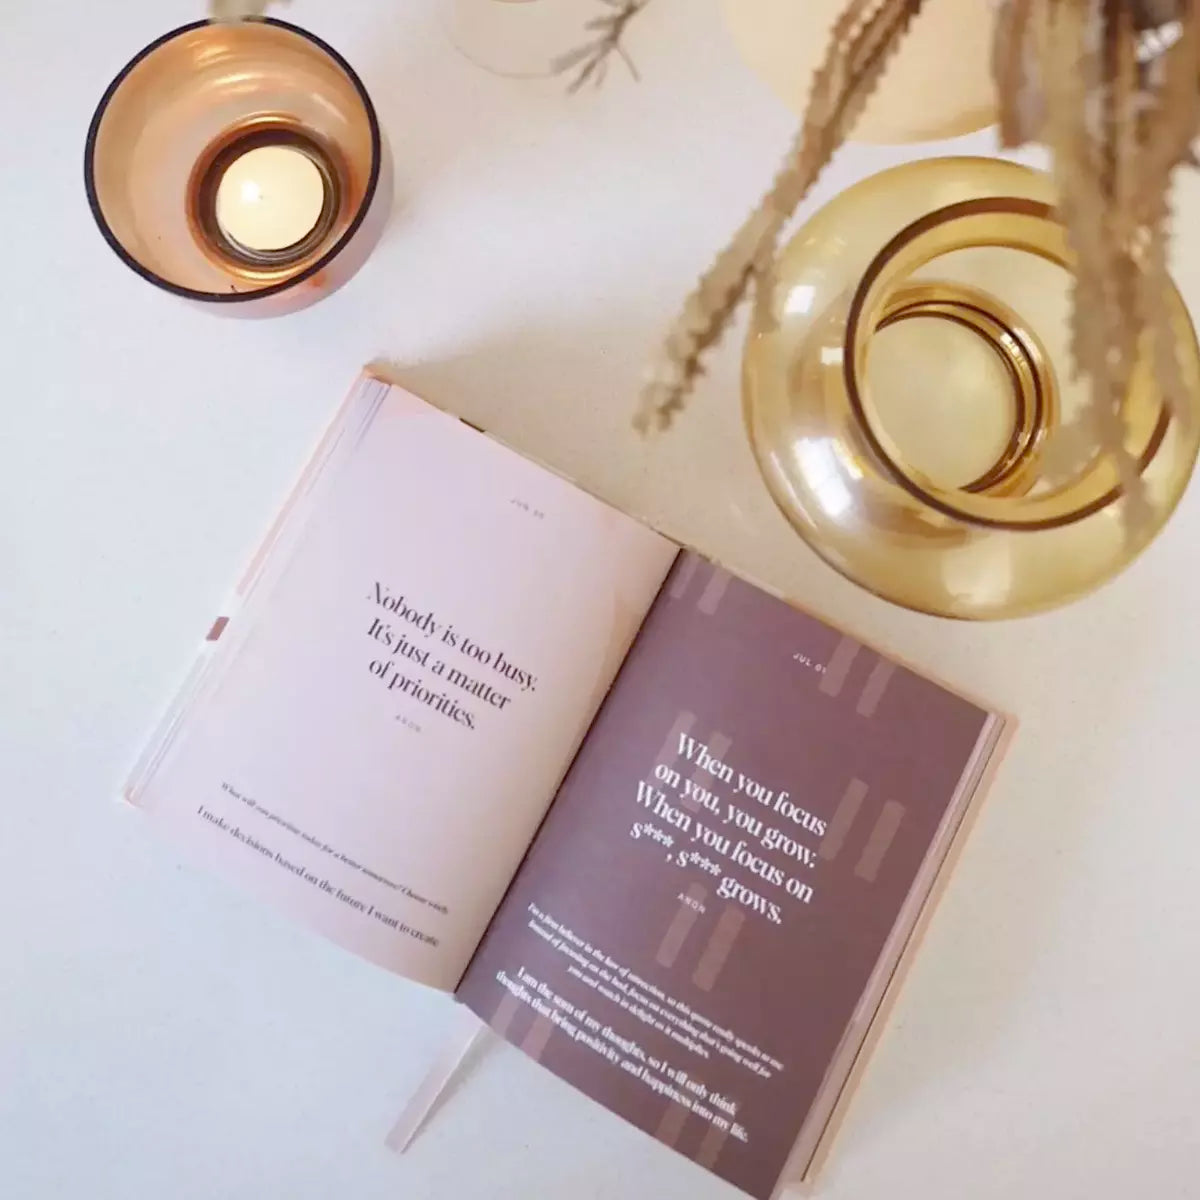 A book of Daily Mantras to Ignite Your Purpose Second Edition by Collective Hub is open on a table next to a candle.